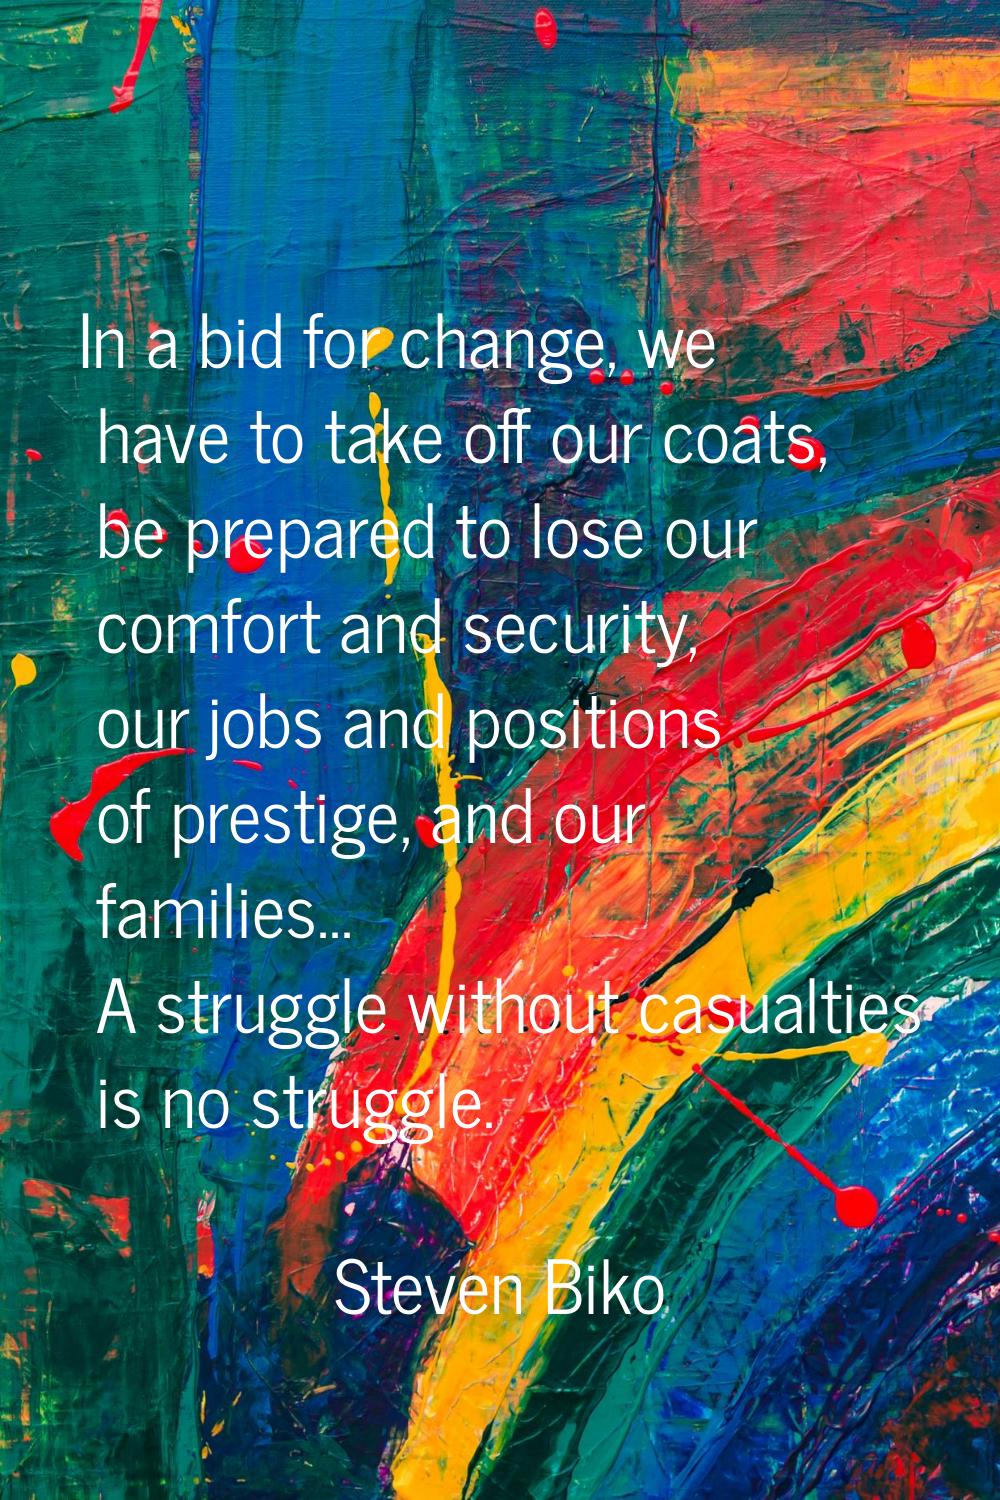 In a bid for change, we have to take off our coats, be prepared to lose our comfort and security, o